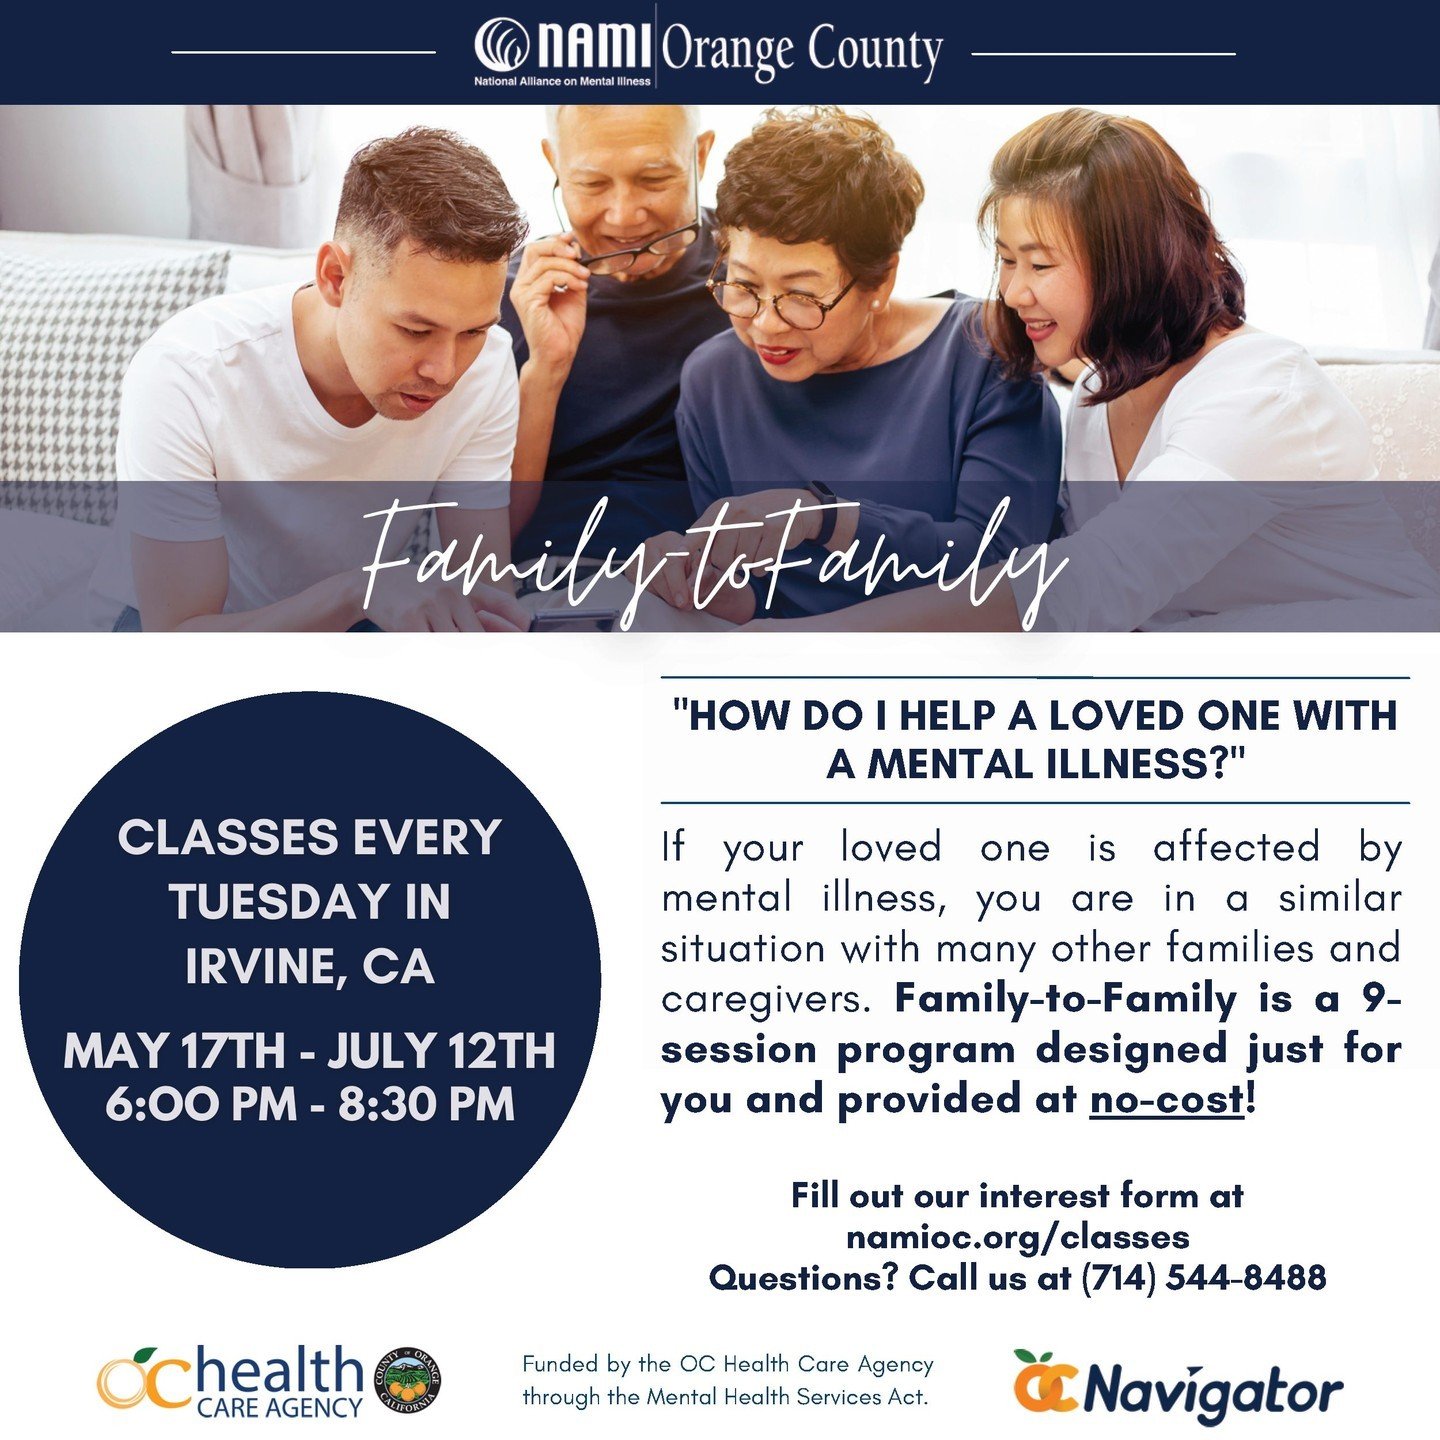 We have a new upcoming Family-to-Family program starting May 17th! Join us every Tuesday in Irvine and meet with other families and caregivers who are also looking for ways to support a loved one affected by mental illness and receive community suppo